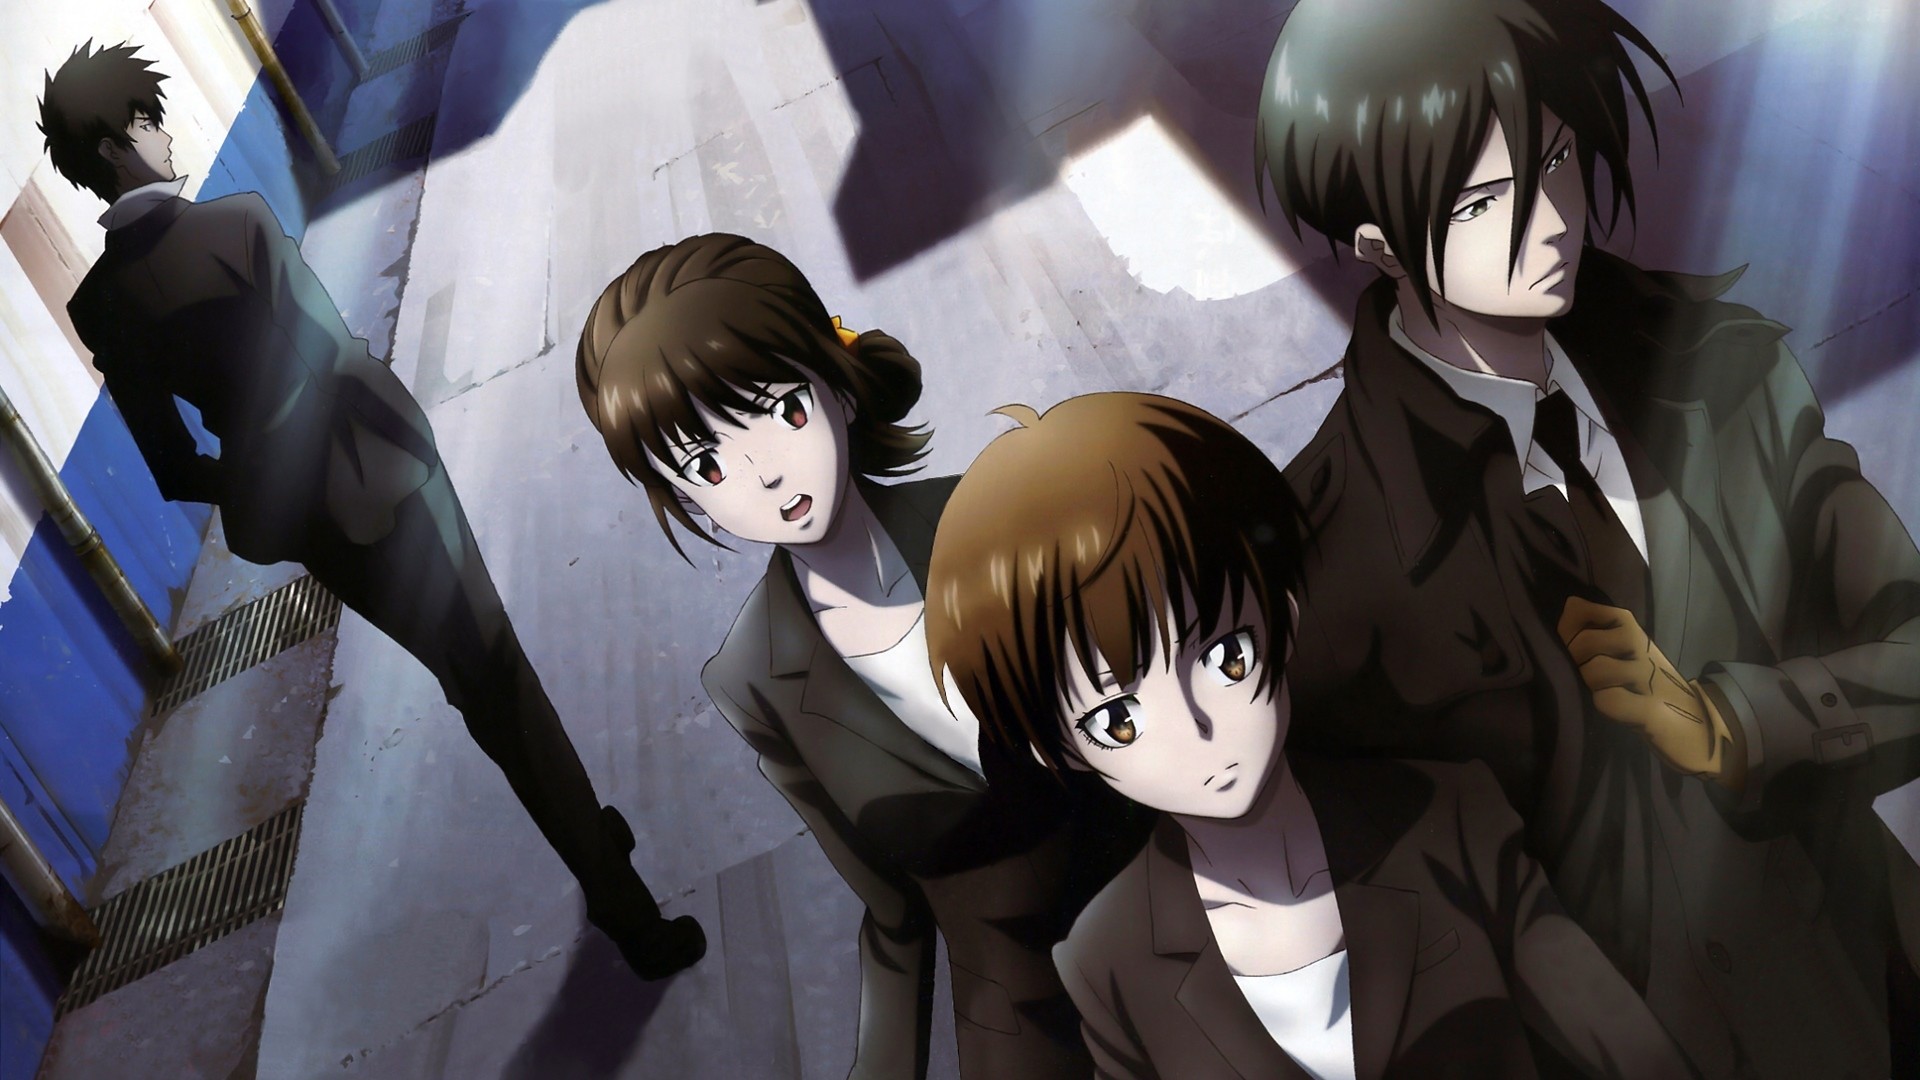 1920x1080 Psycho-Pass Wallpaper For PC